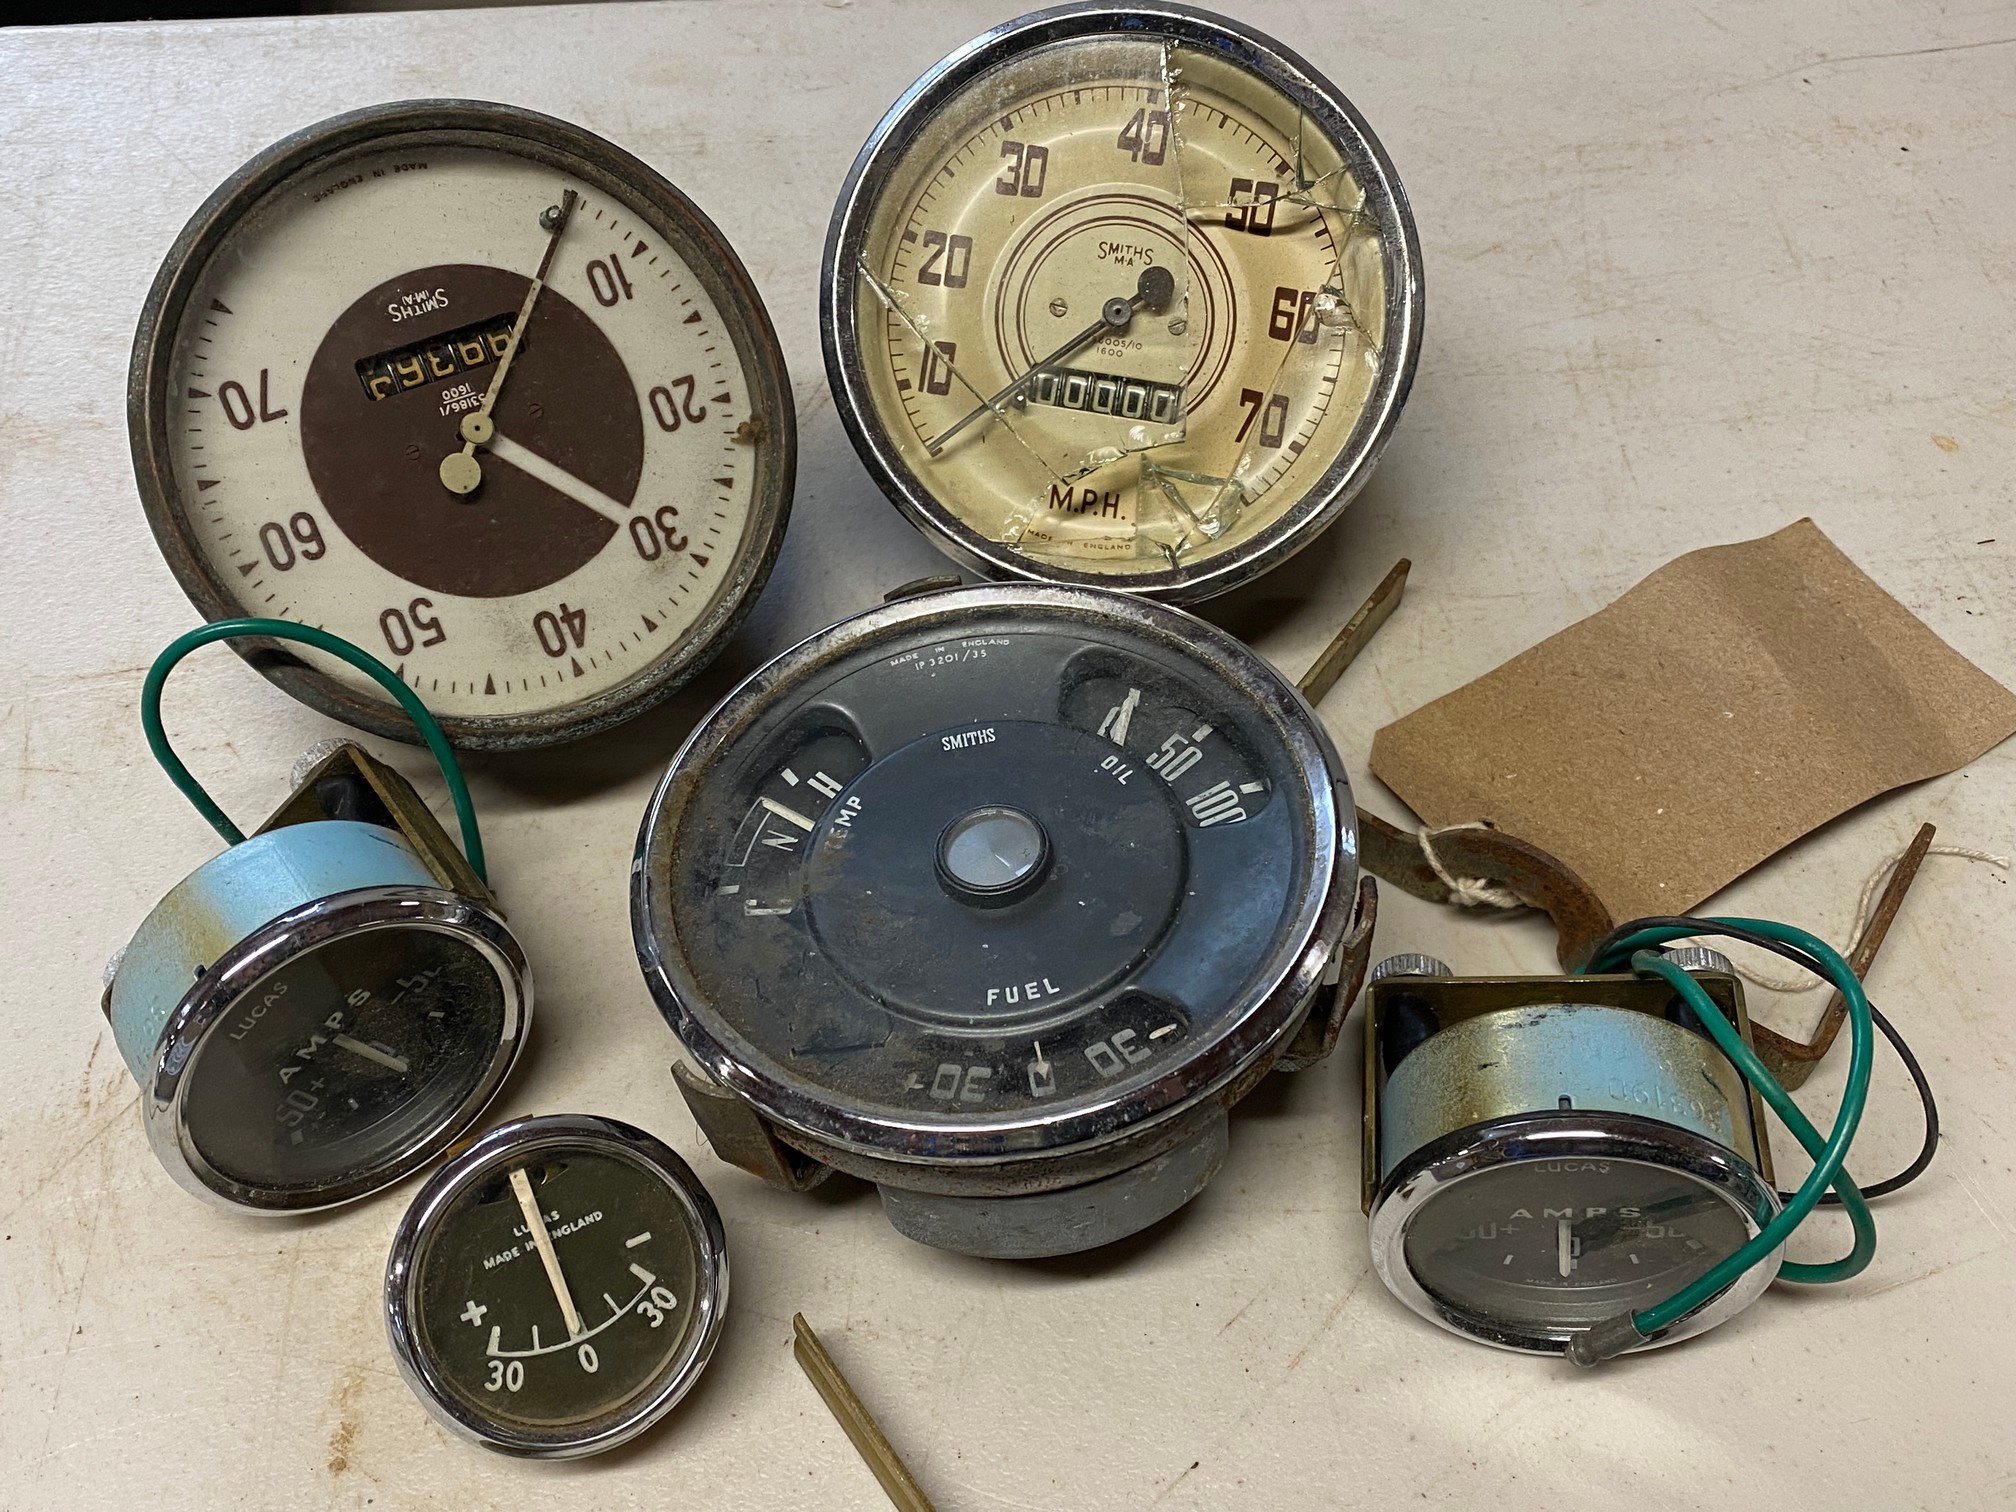 Three black faced ammeters, appear new old stock, two 0-70 mph speedometers plus a combined gauge.